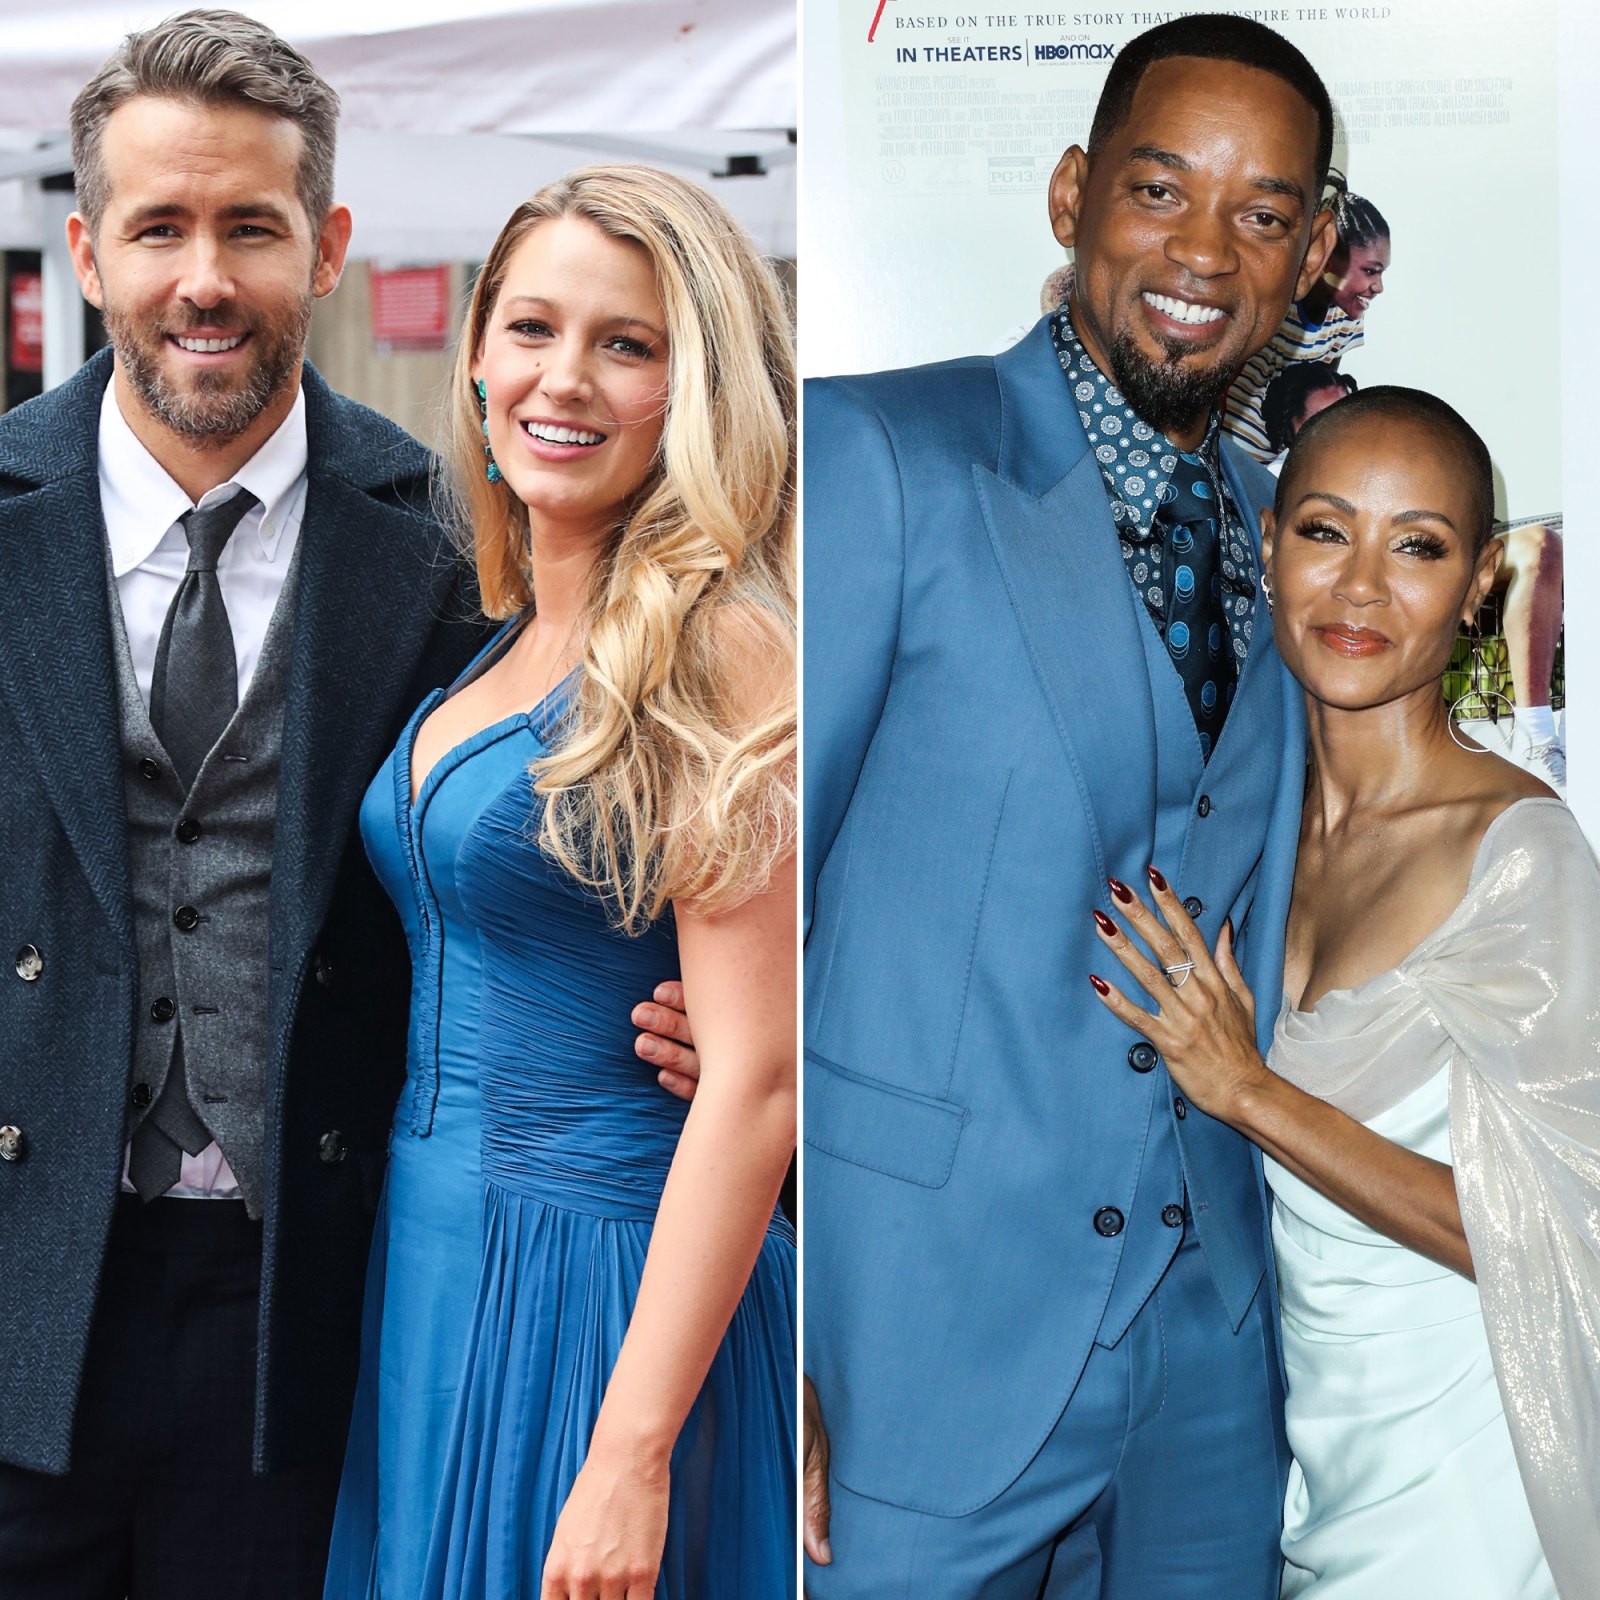 Hollywood's Hottest Married Couples: From Blake Lively and Ryan Reynolds to Will Smith and Jada Pinkett Smith